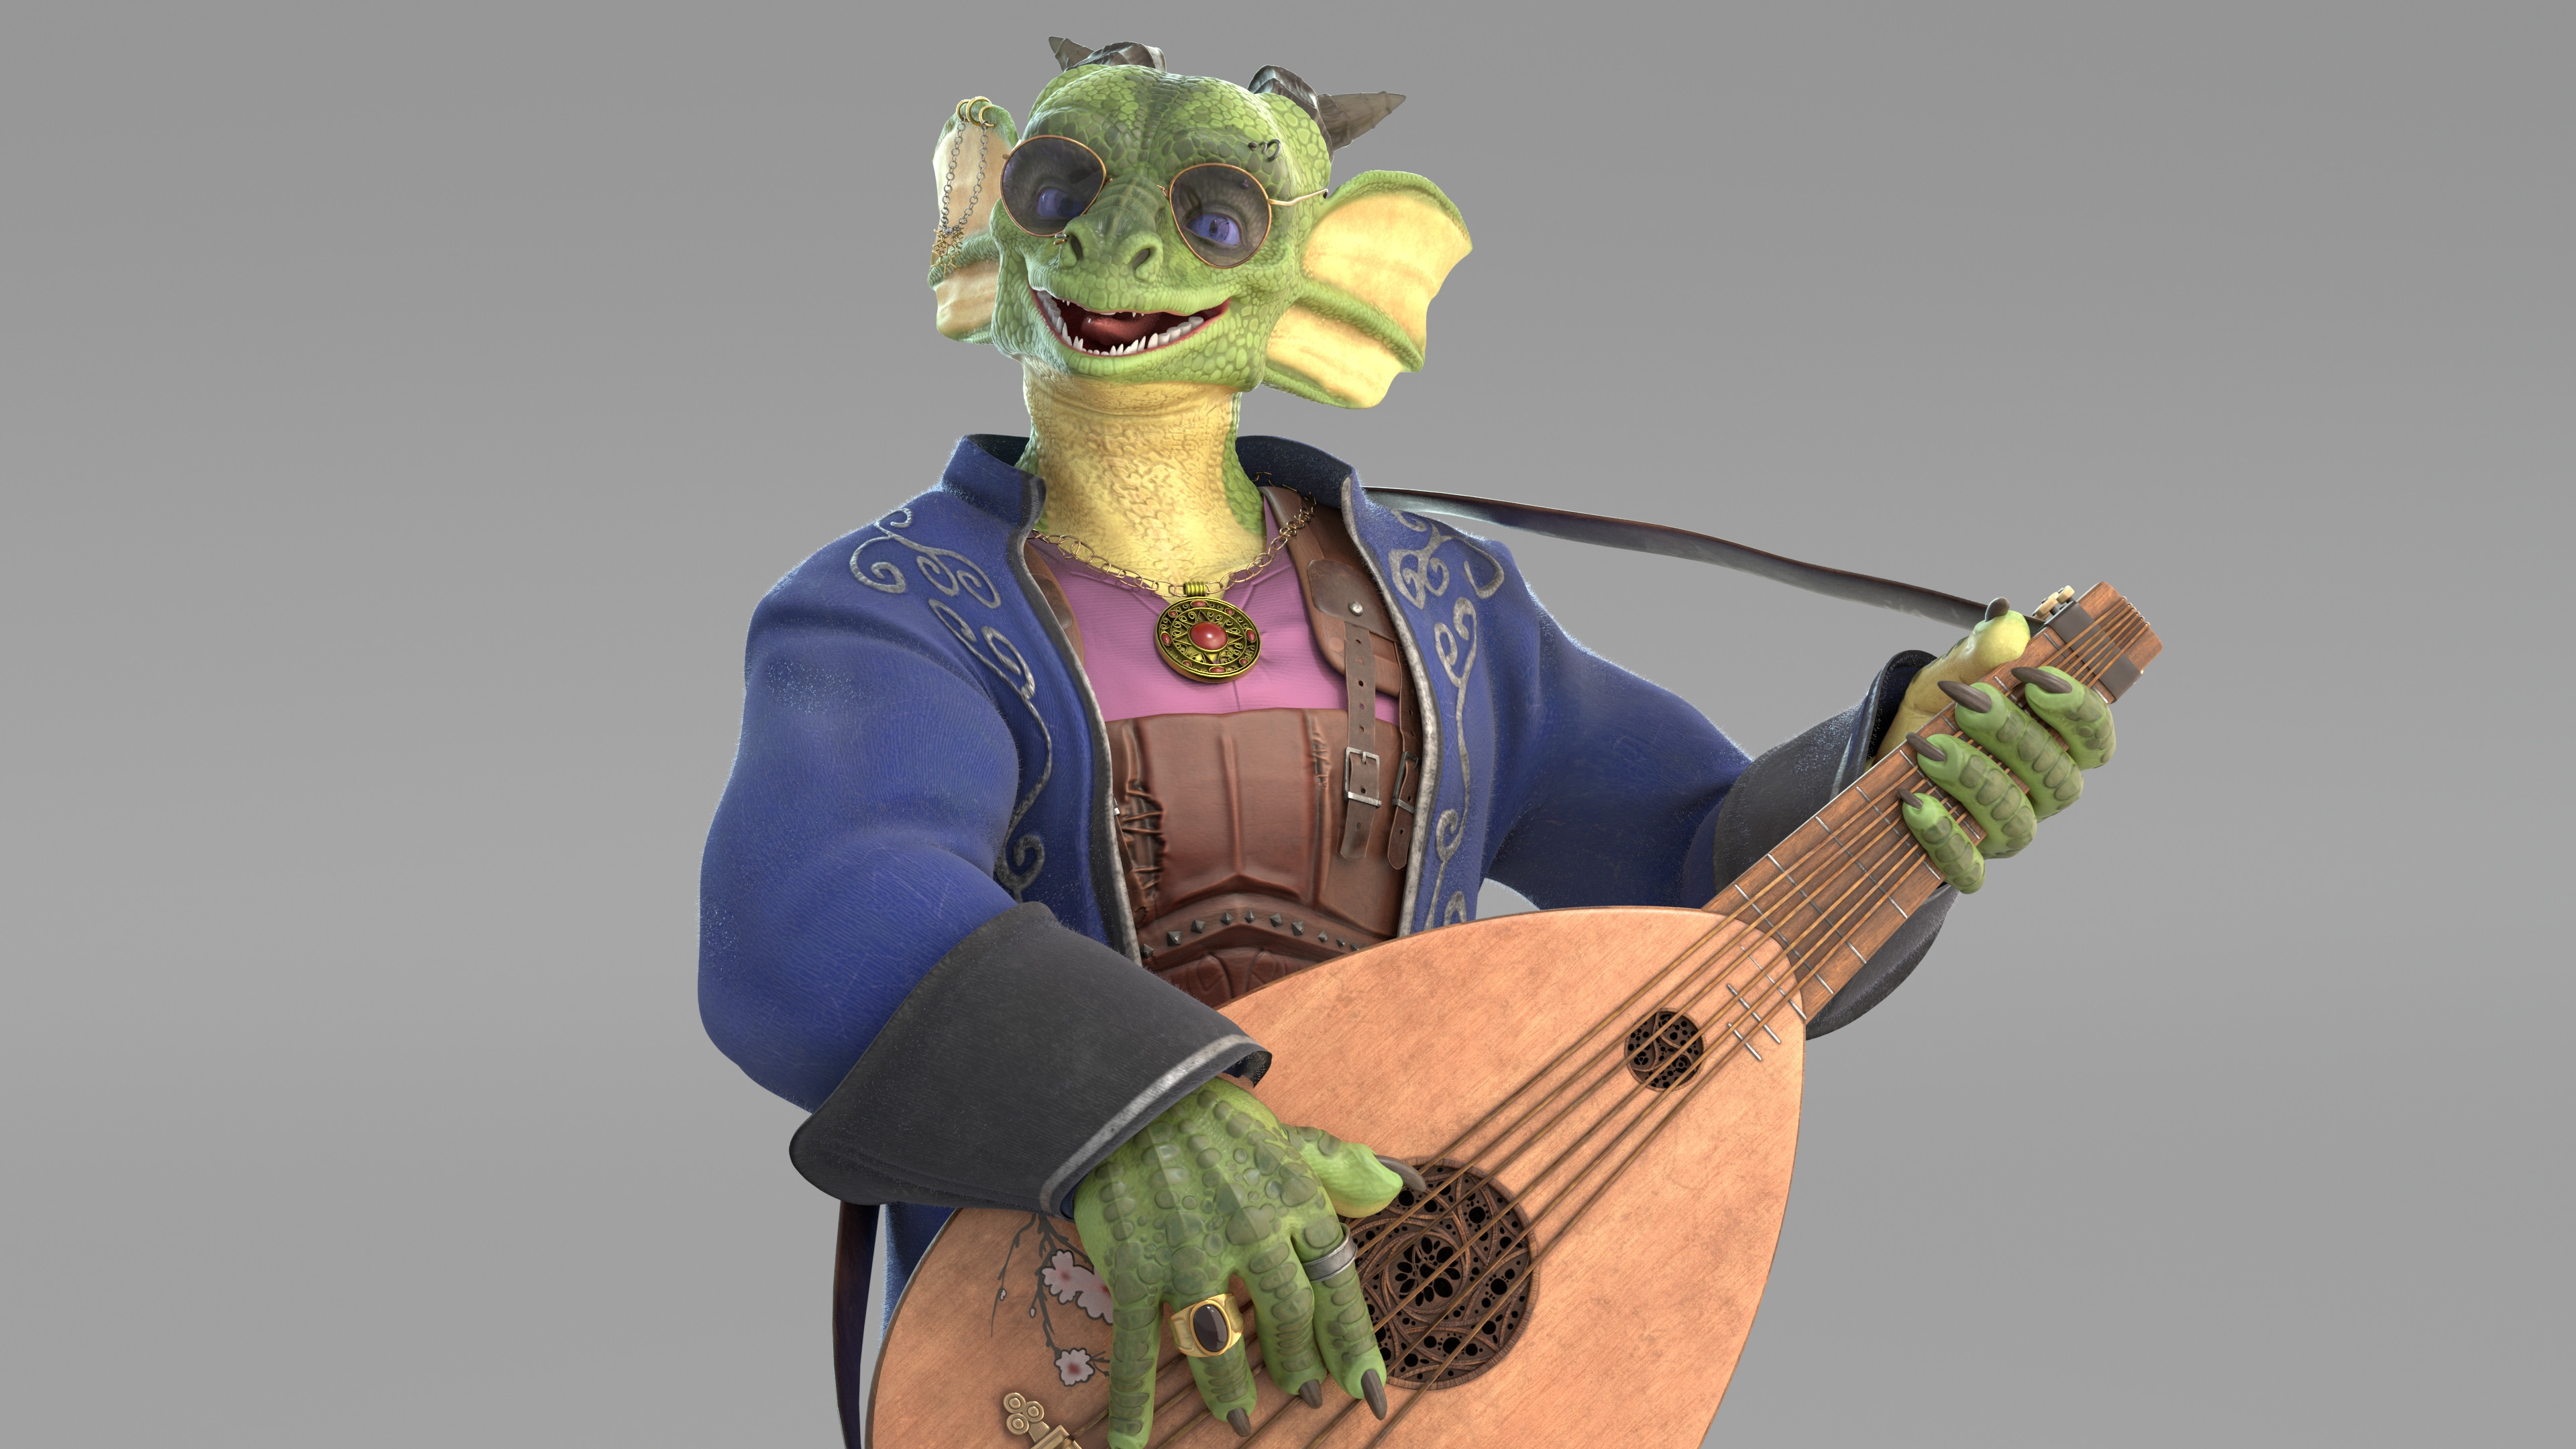 This is a final render showcasing his face and lute.